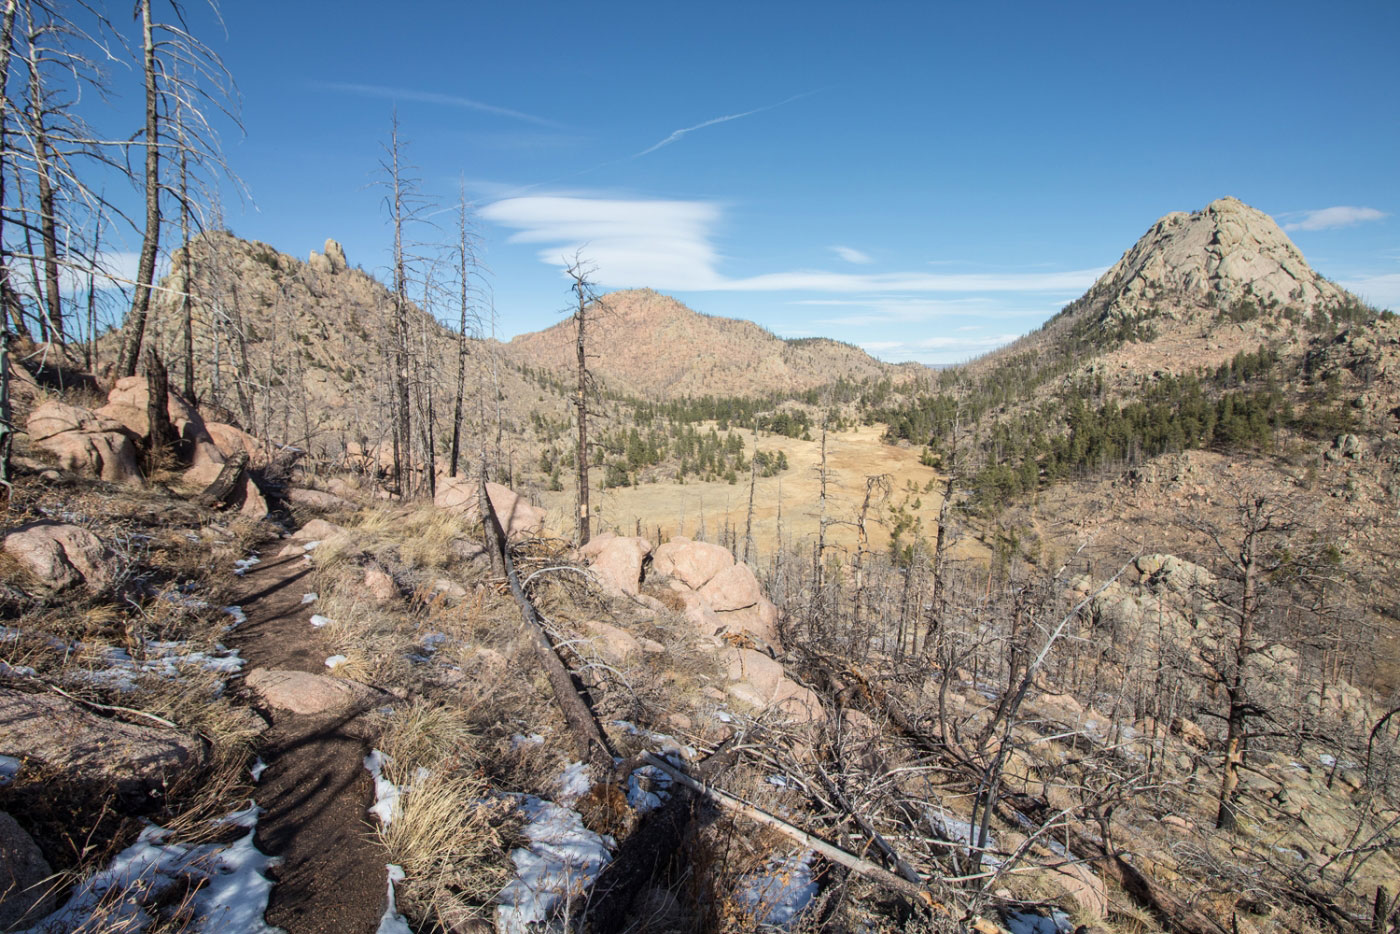 Hike Greyrock Mountain Meadows Loop in Roosevelt National Forest, Colorado - Stav is Lost